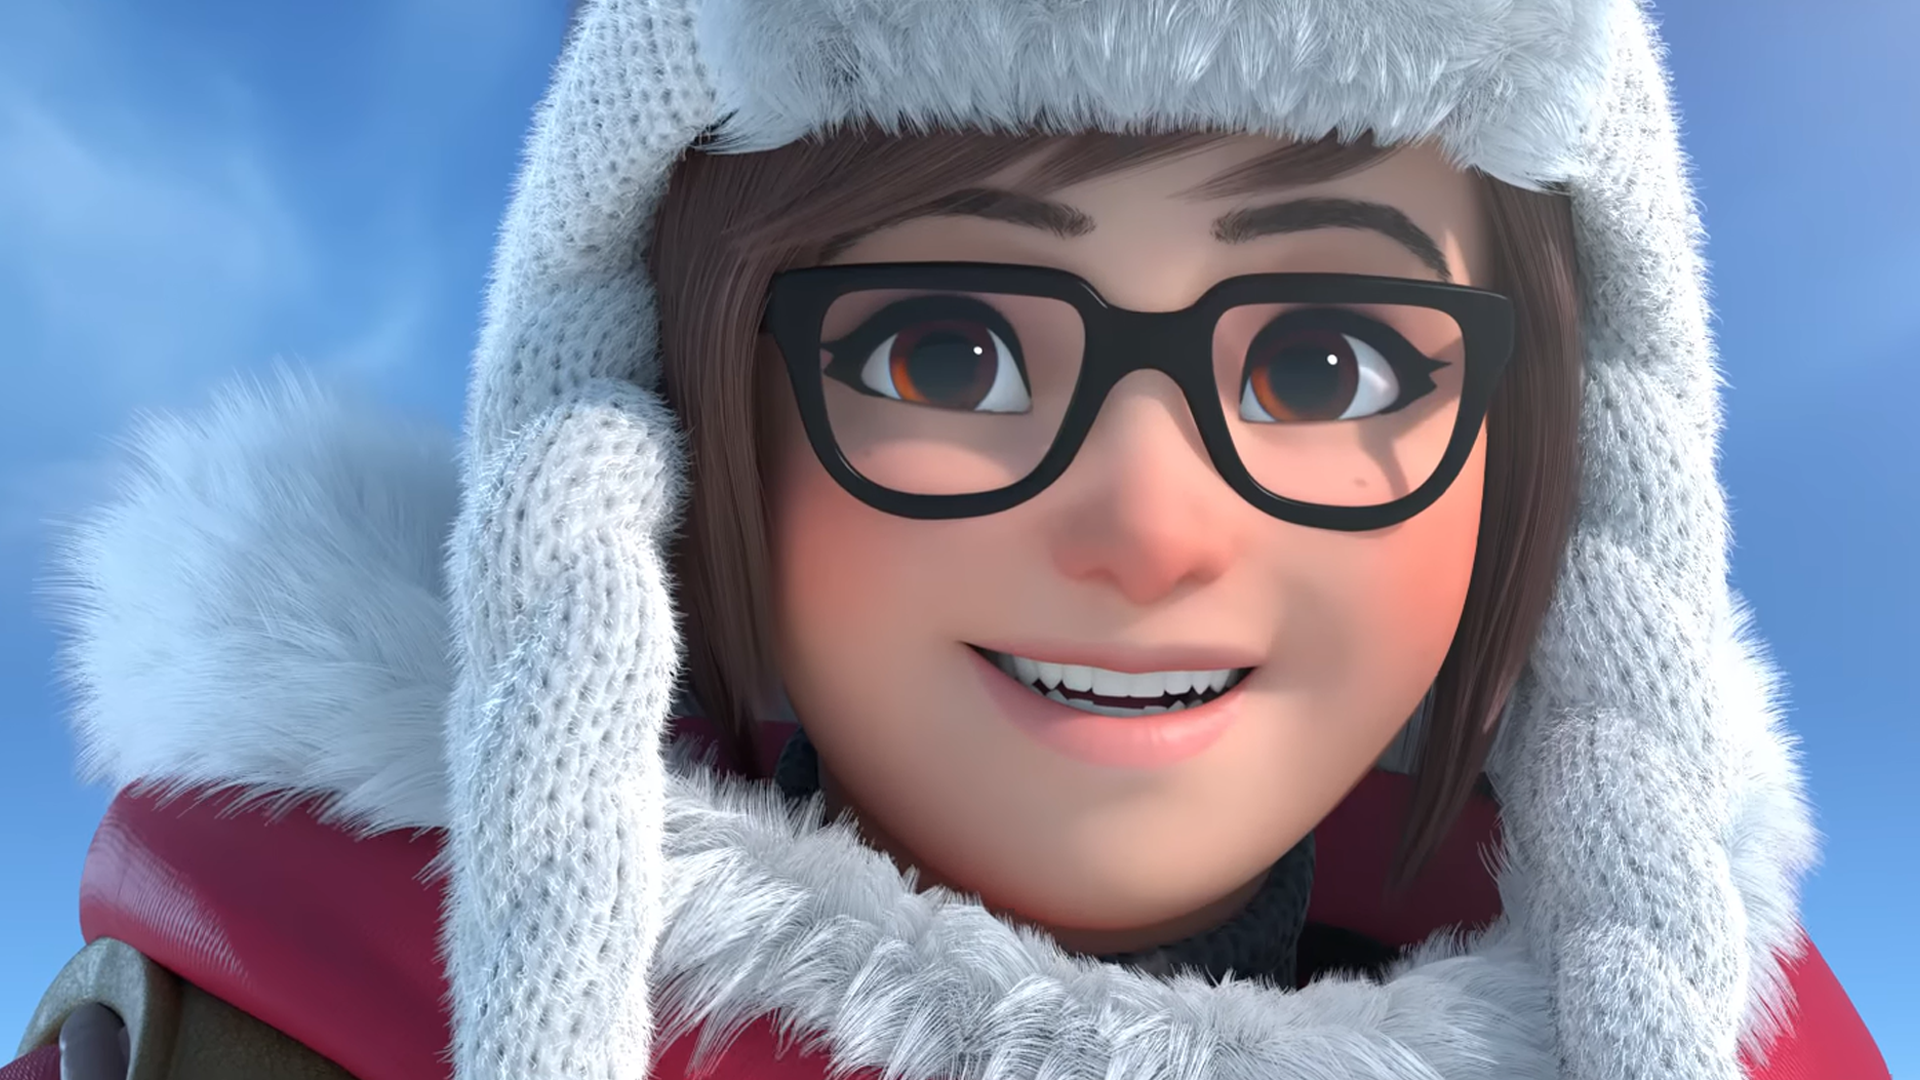 General 1920x1080 Overwatch Mei (Overwatch) Blizzard Entertainment video game characters face closeup PC gaming women with glasses smiling